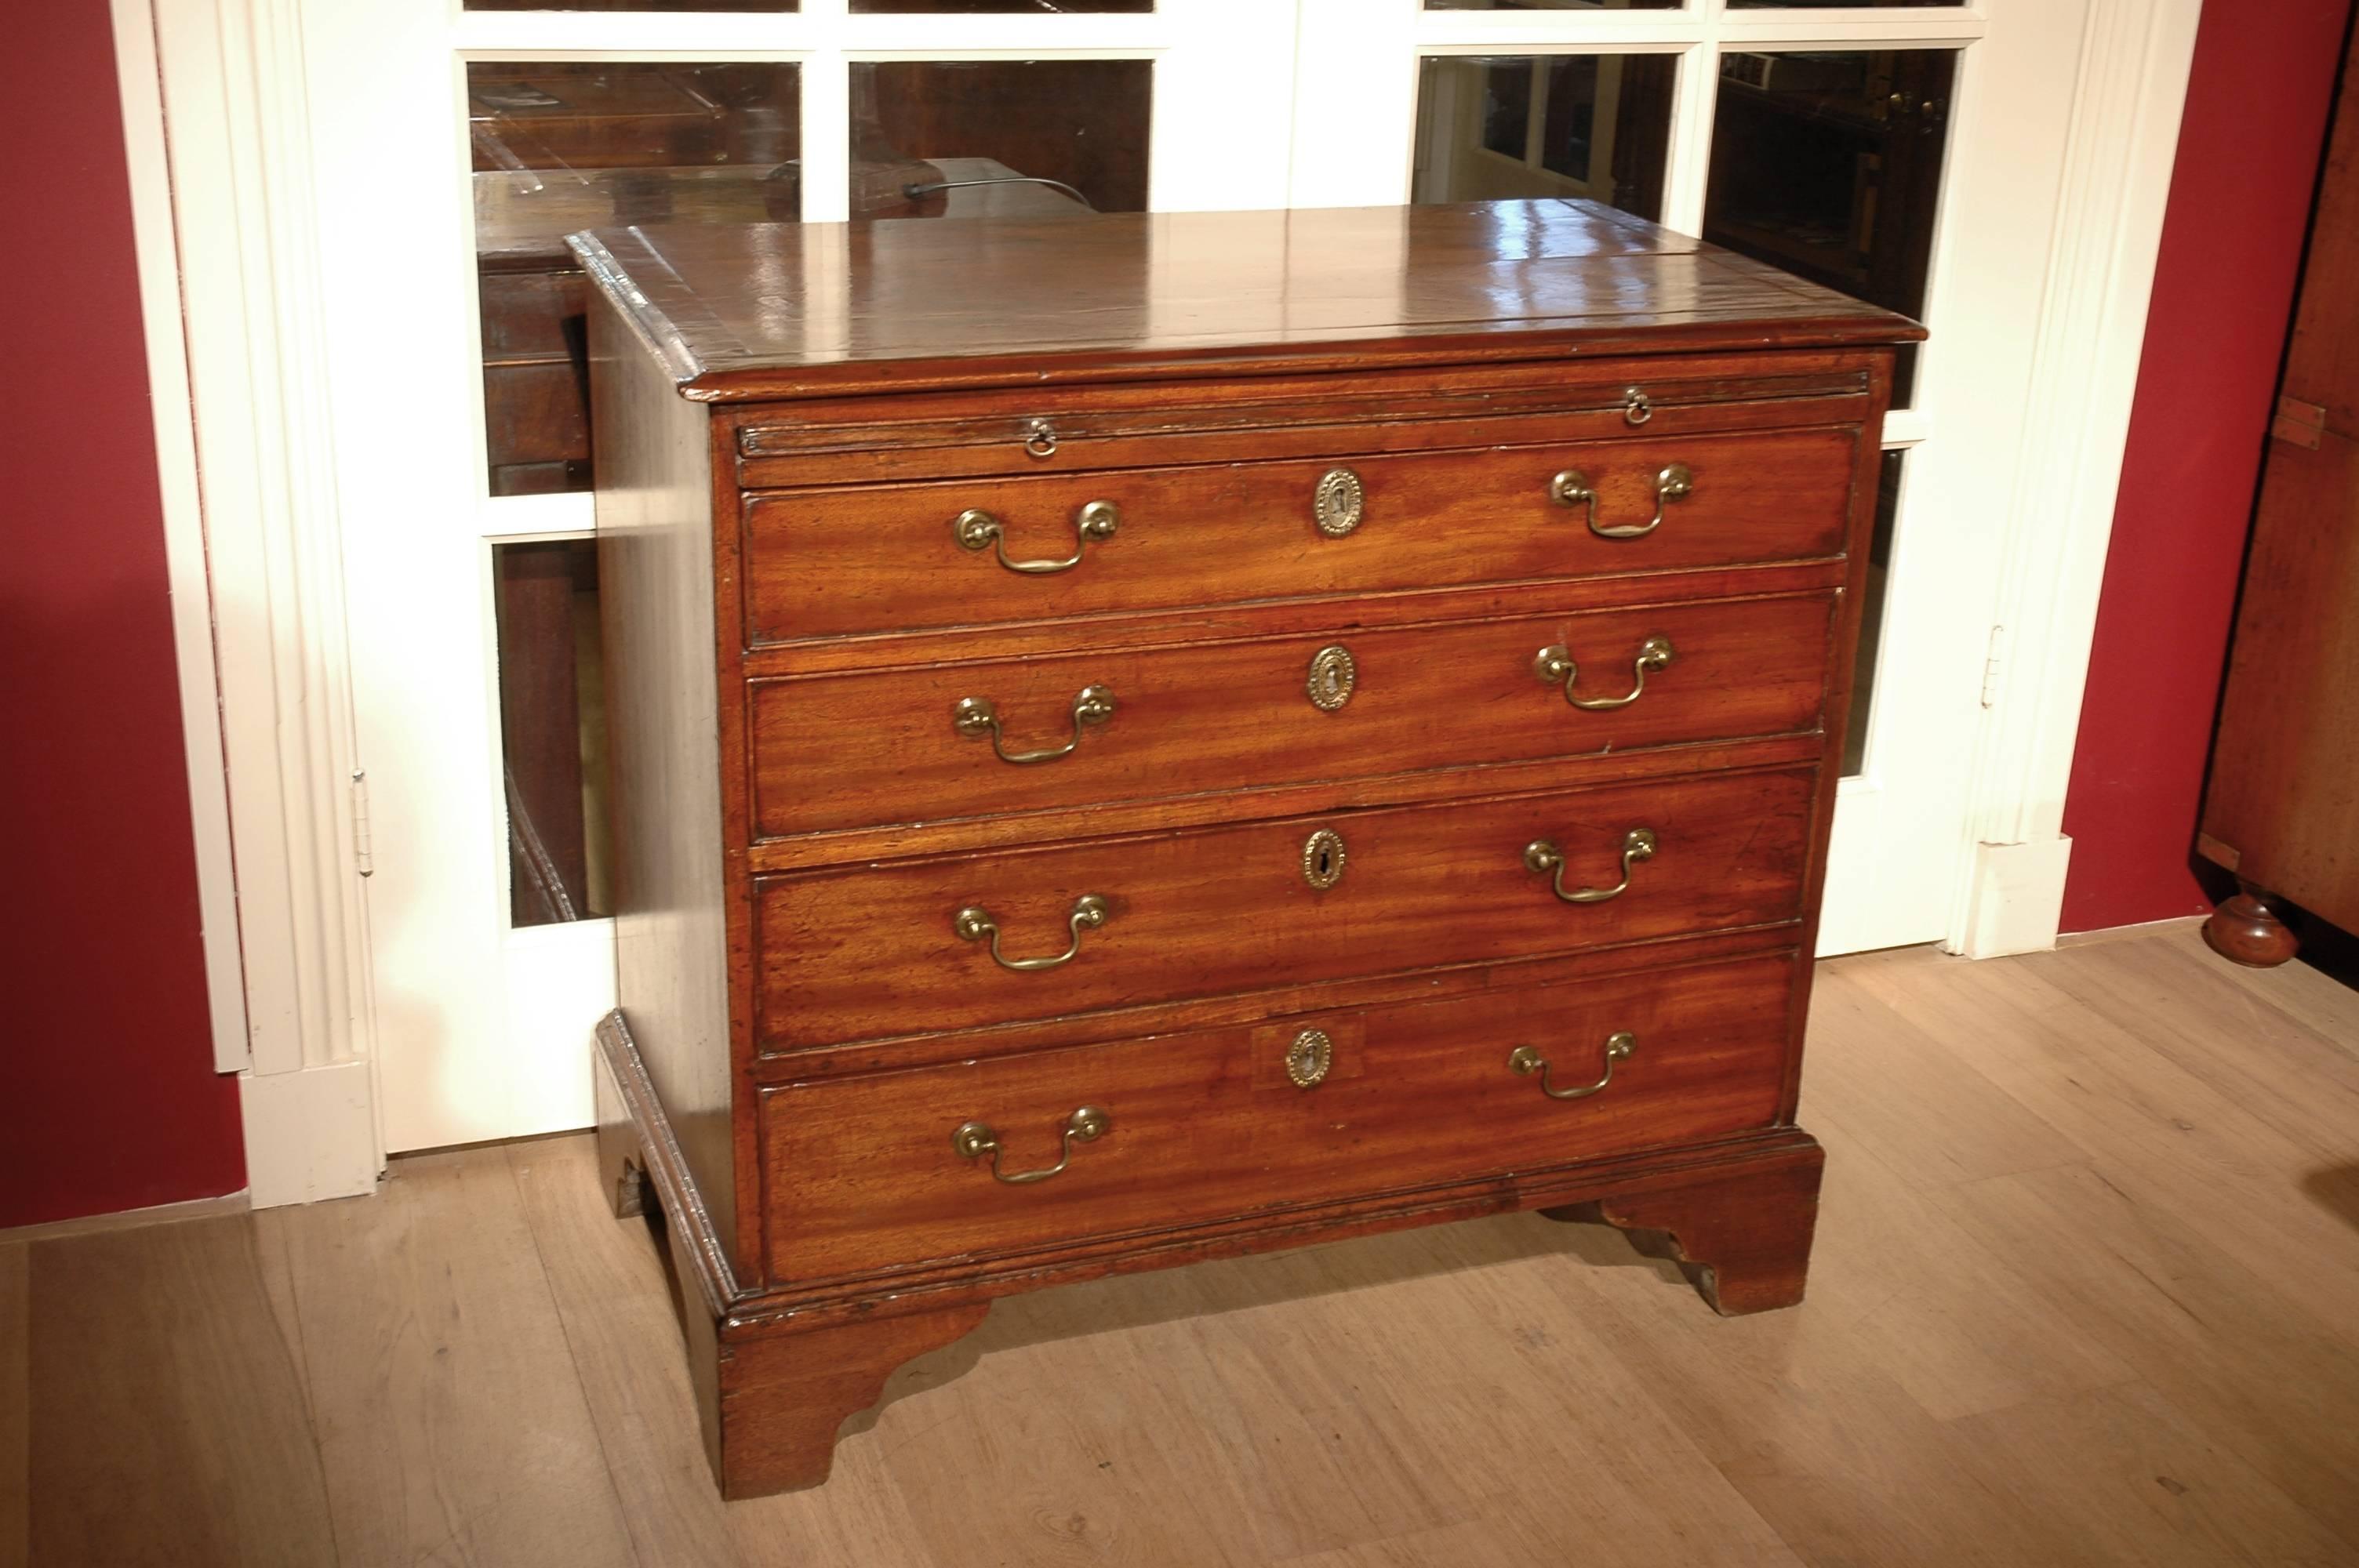 Gorgeous small mahogany bachelor chest of drawers dating from the 18th century. It has a beautifully aged mahogany wooden colour and the original swan neck drawer handles. The top panel is completed with a crossbanded finish (an extra mahogany